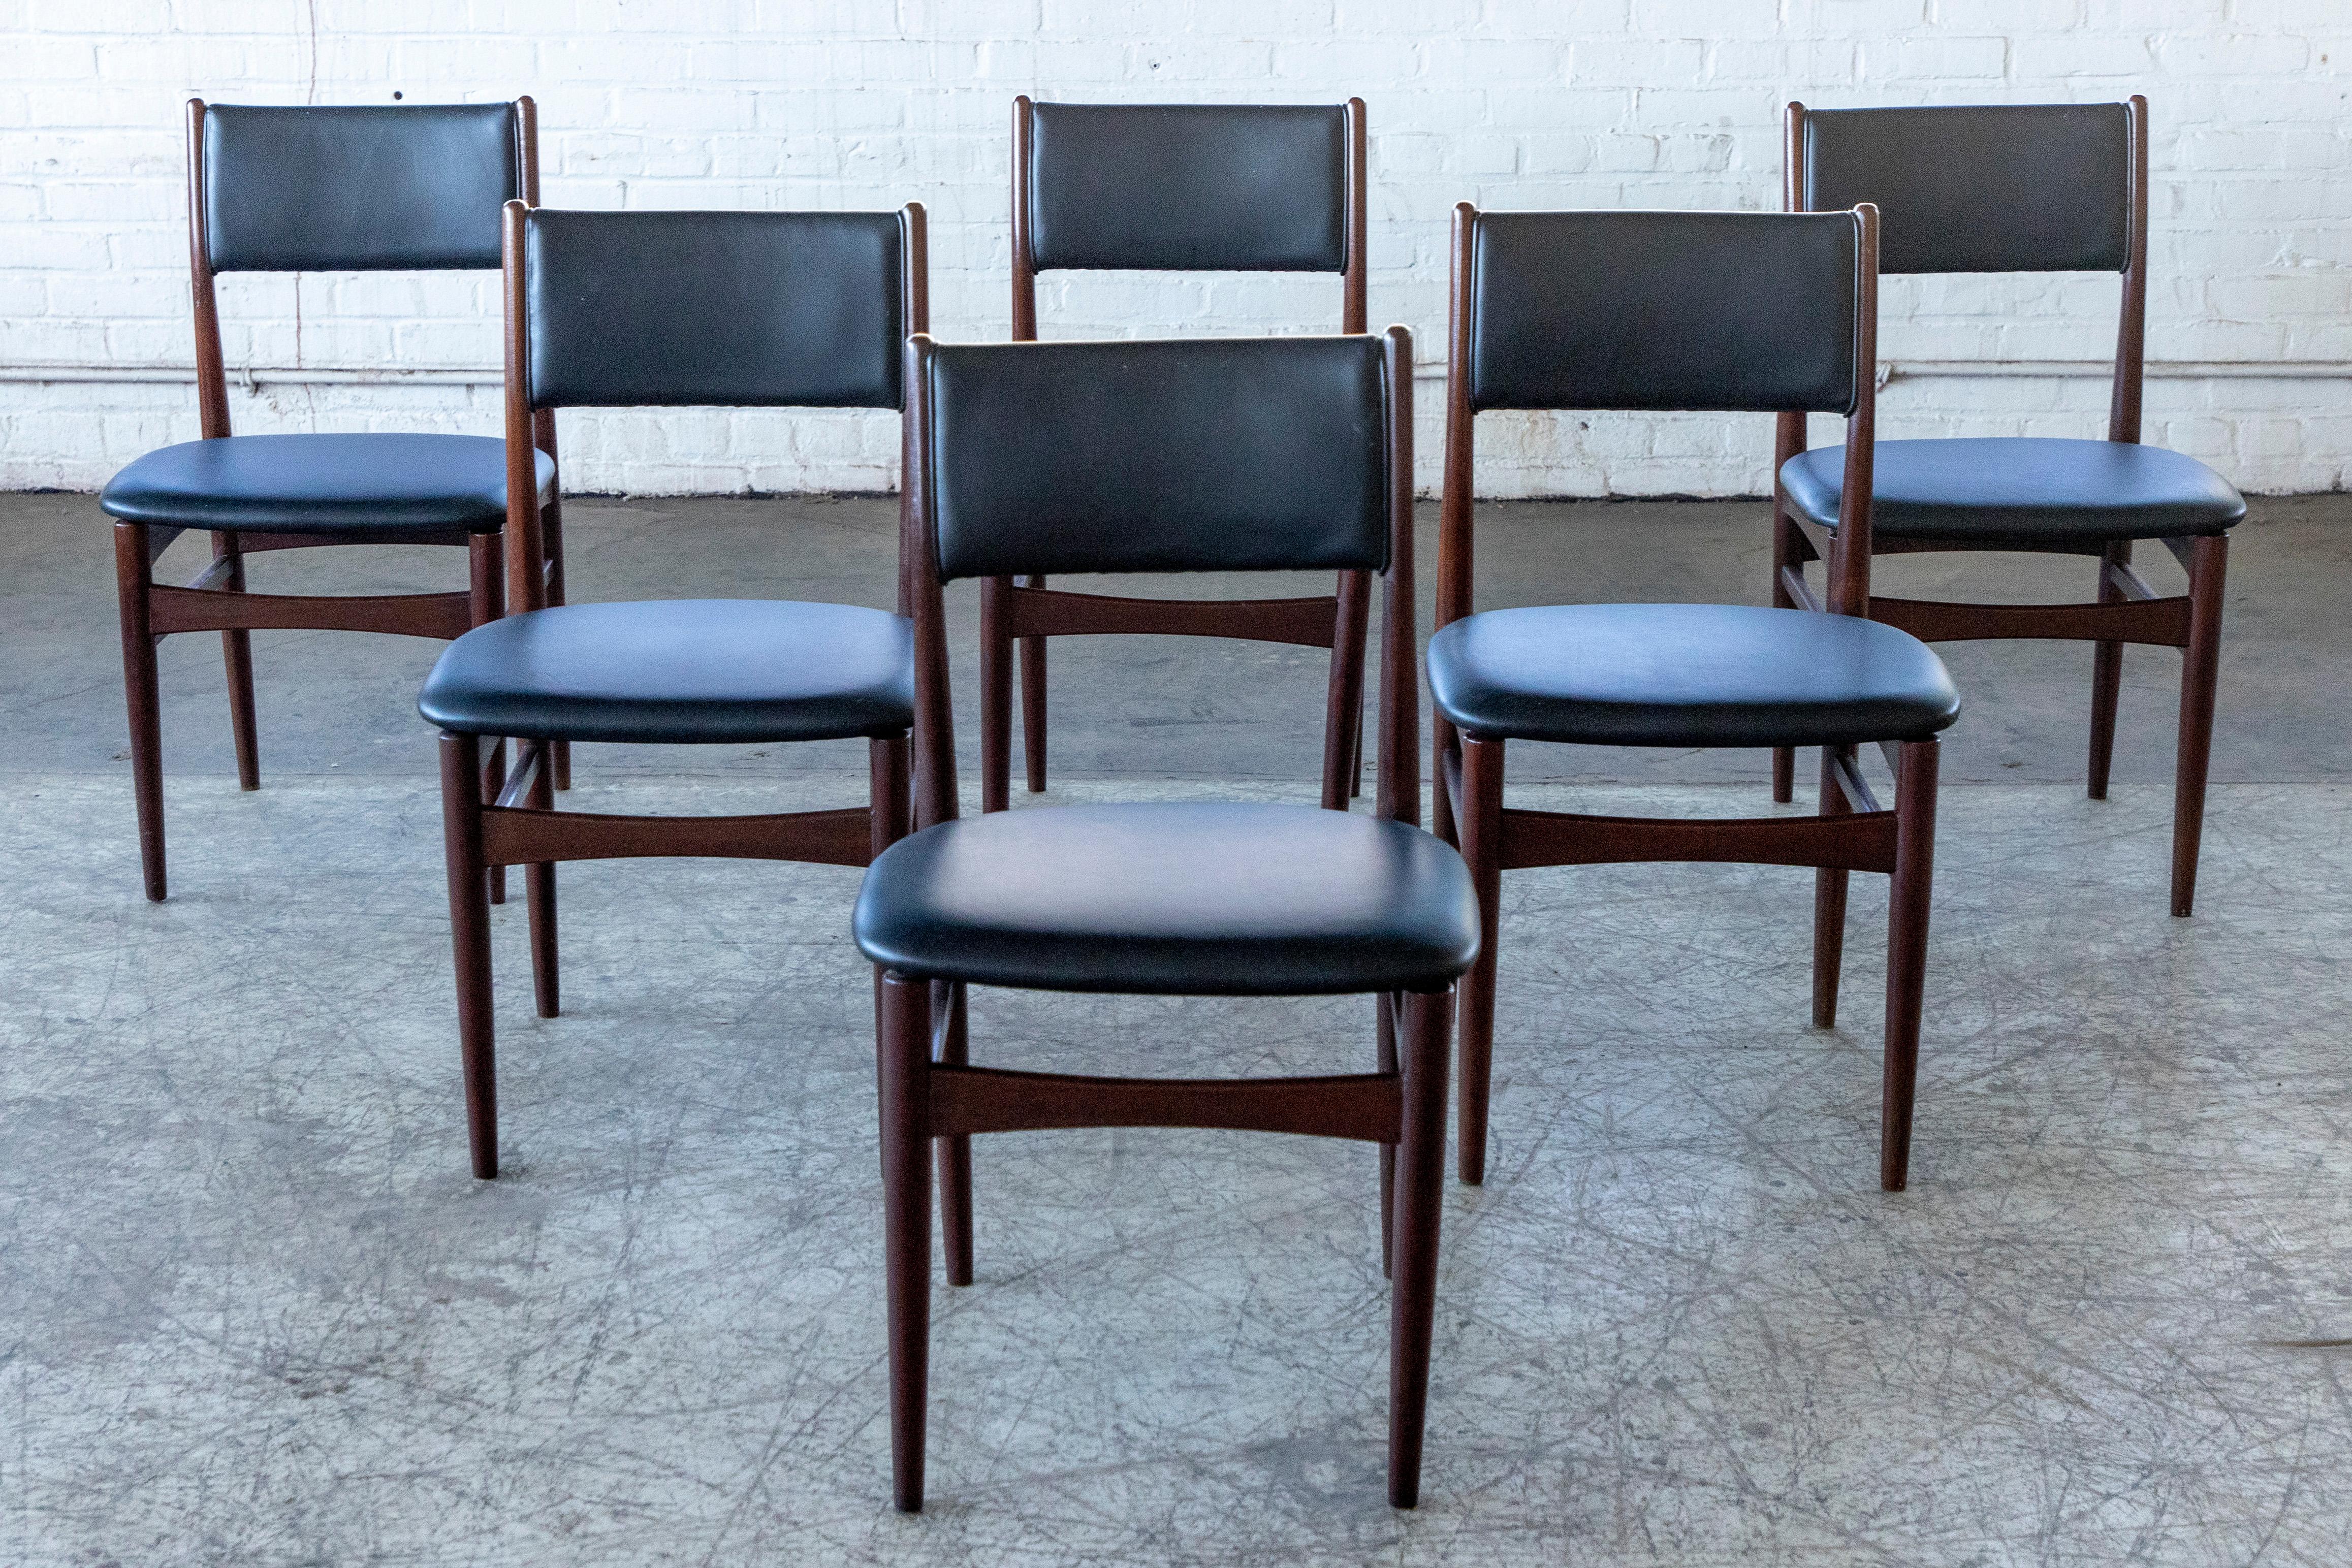 Set of 6 Danish Midcentury Dining Chairs in Teak and Black Leather For Sale 4